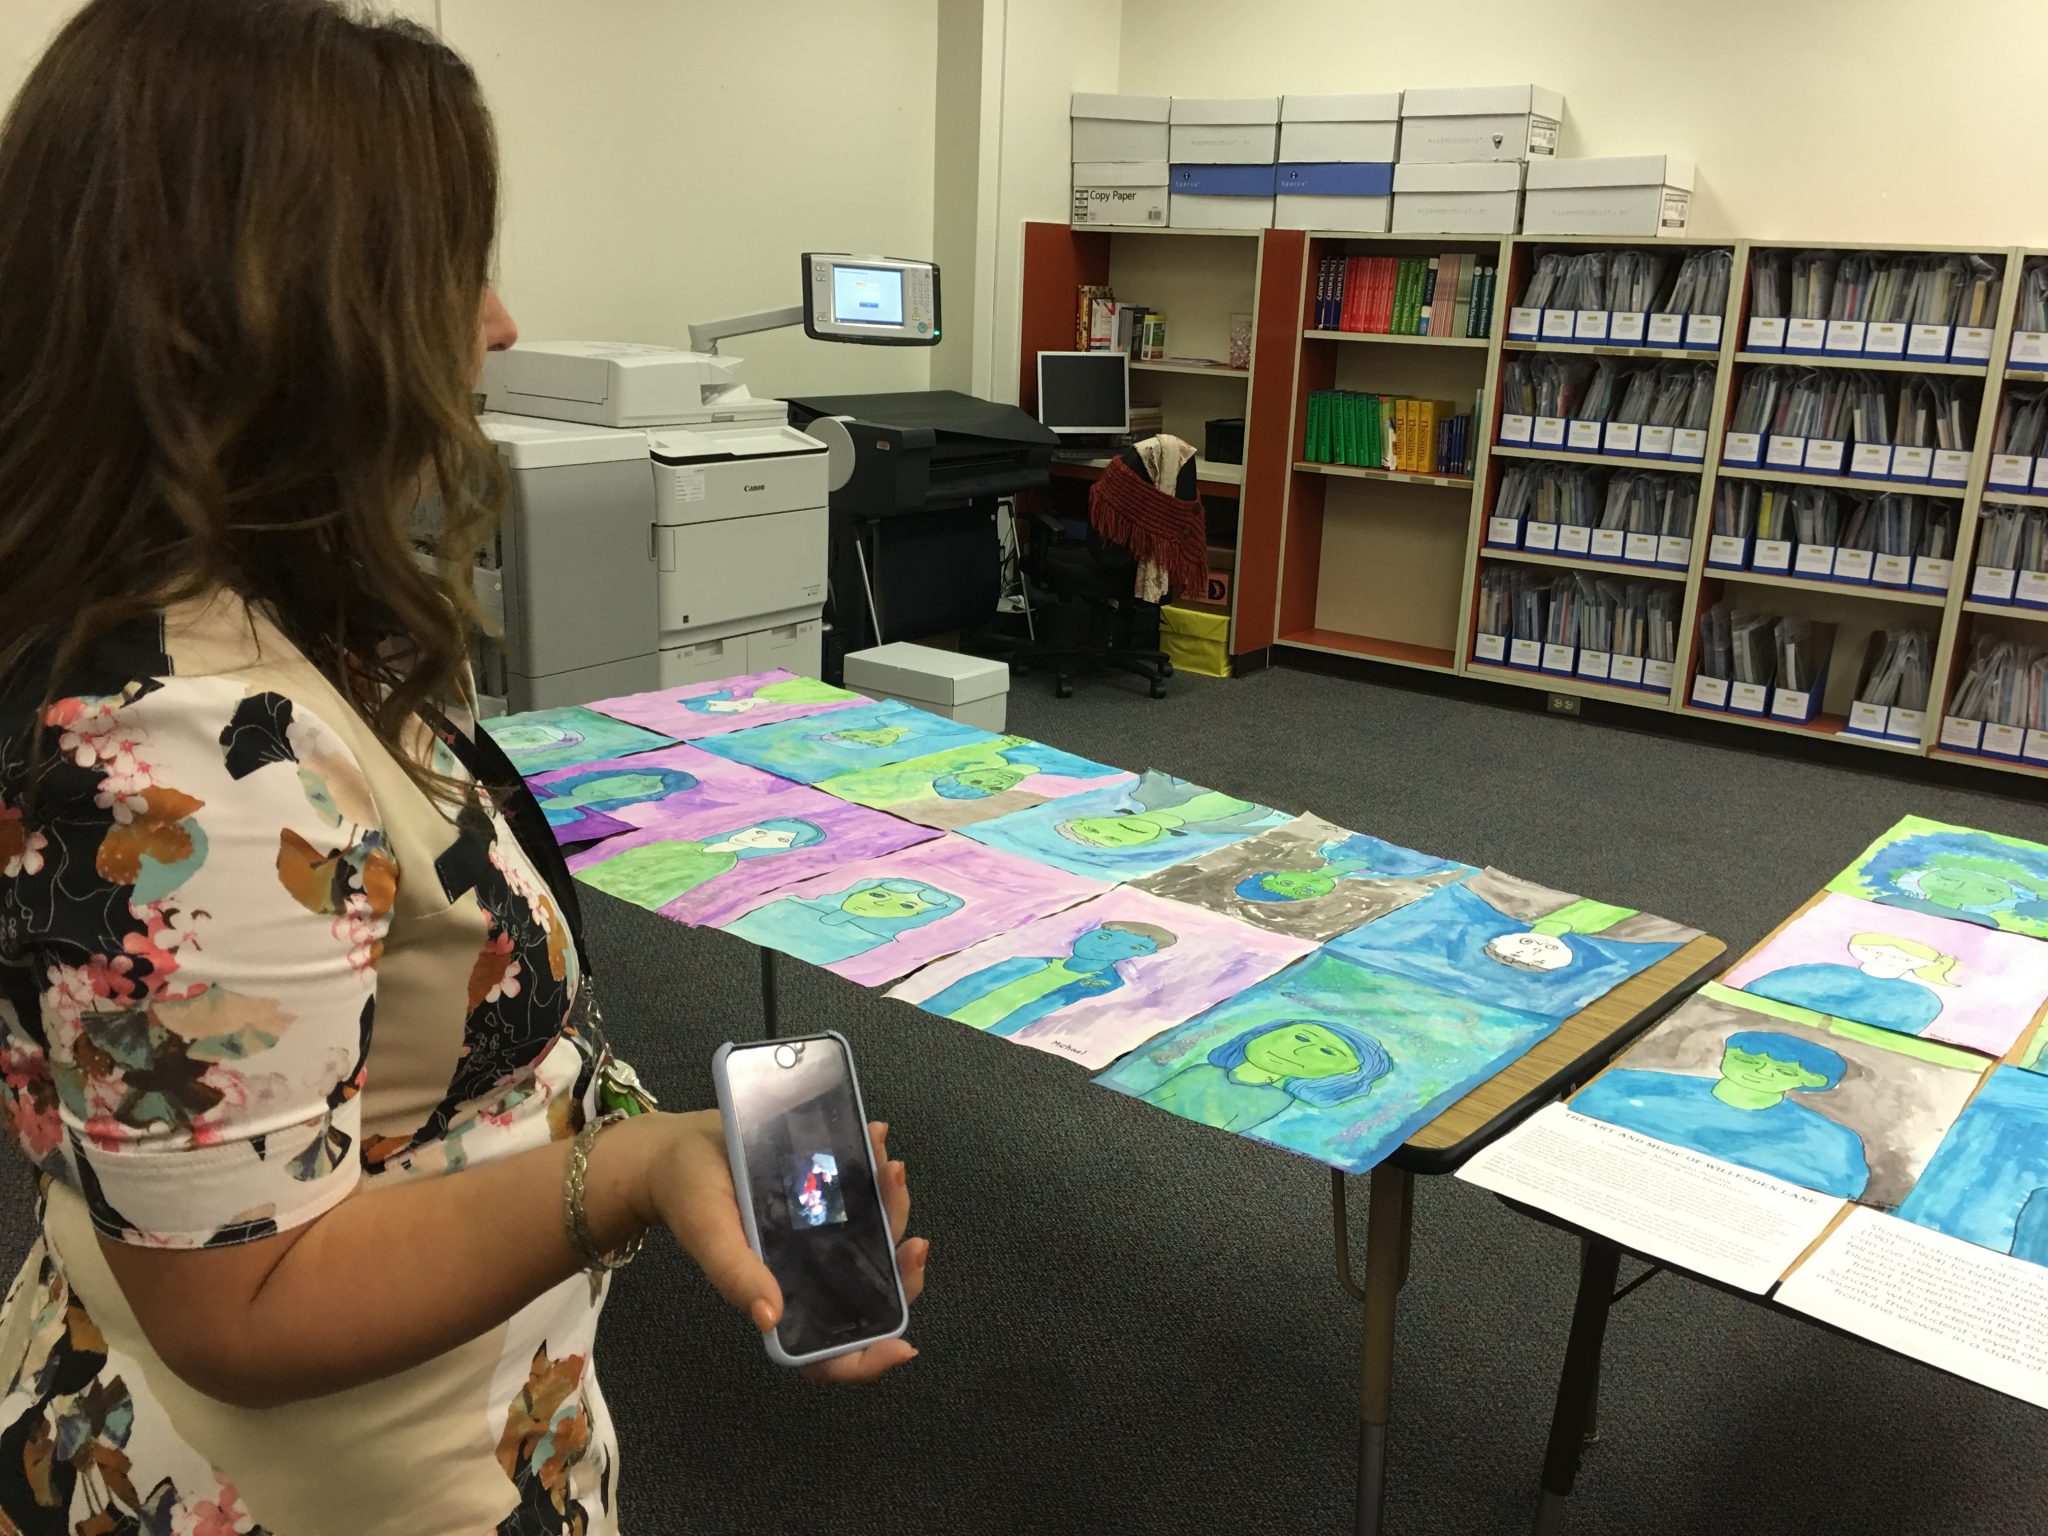 Music teacher Natalie Herbert plays classical music from her phone to help explain the artwork her students made. 